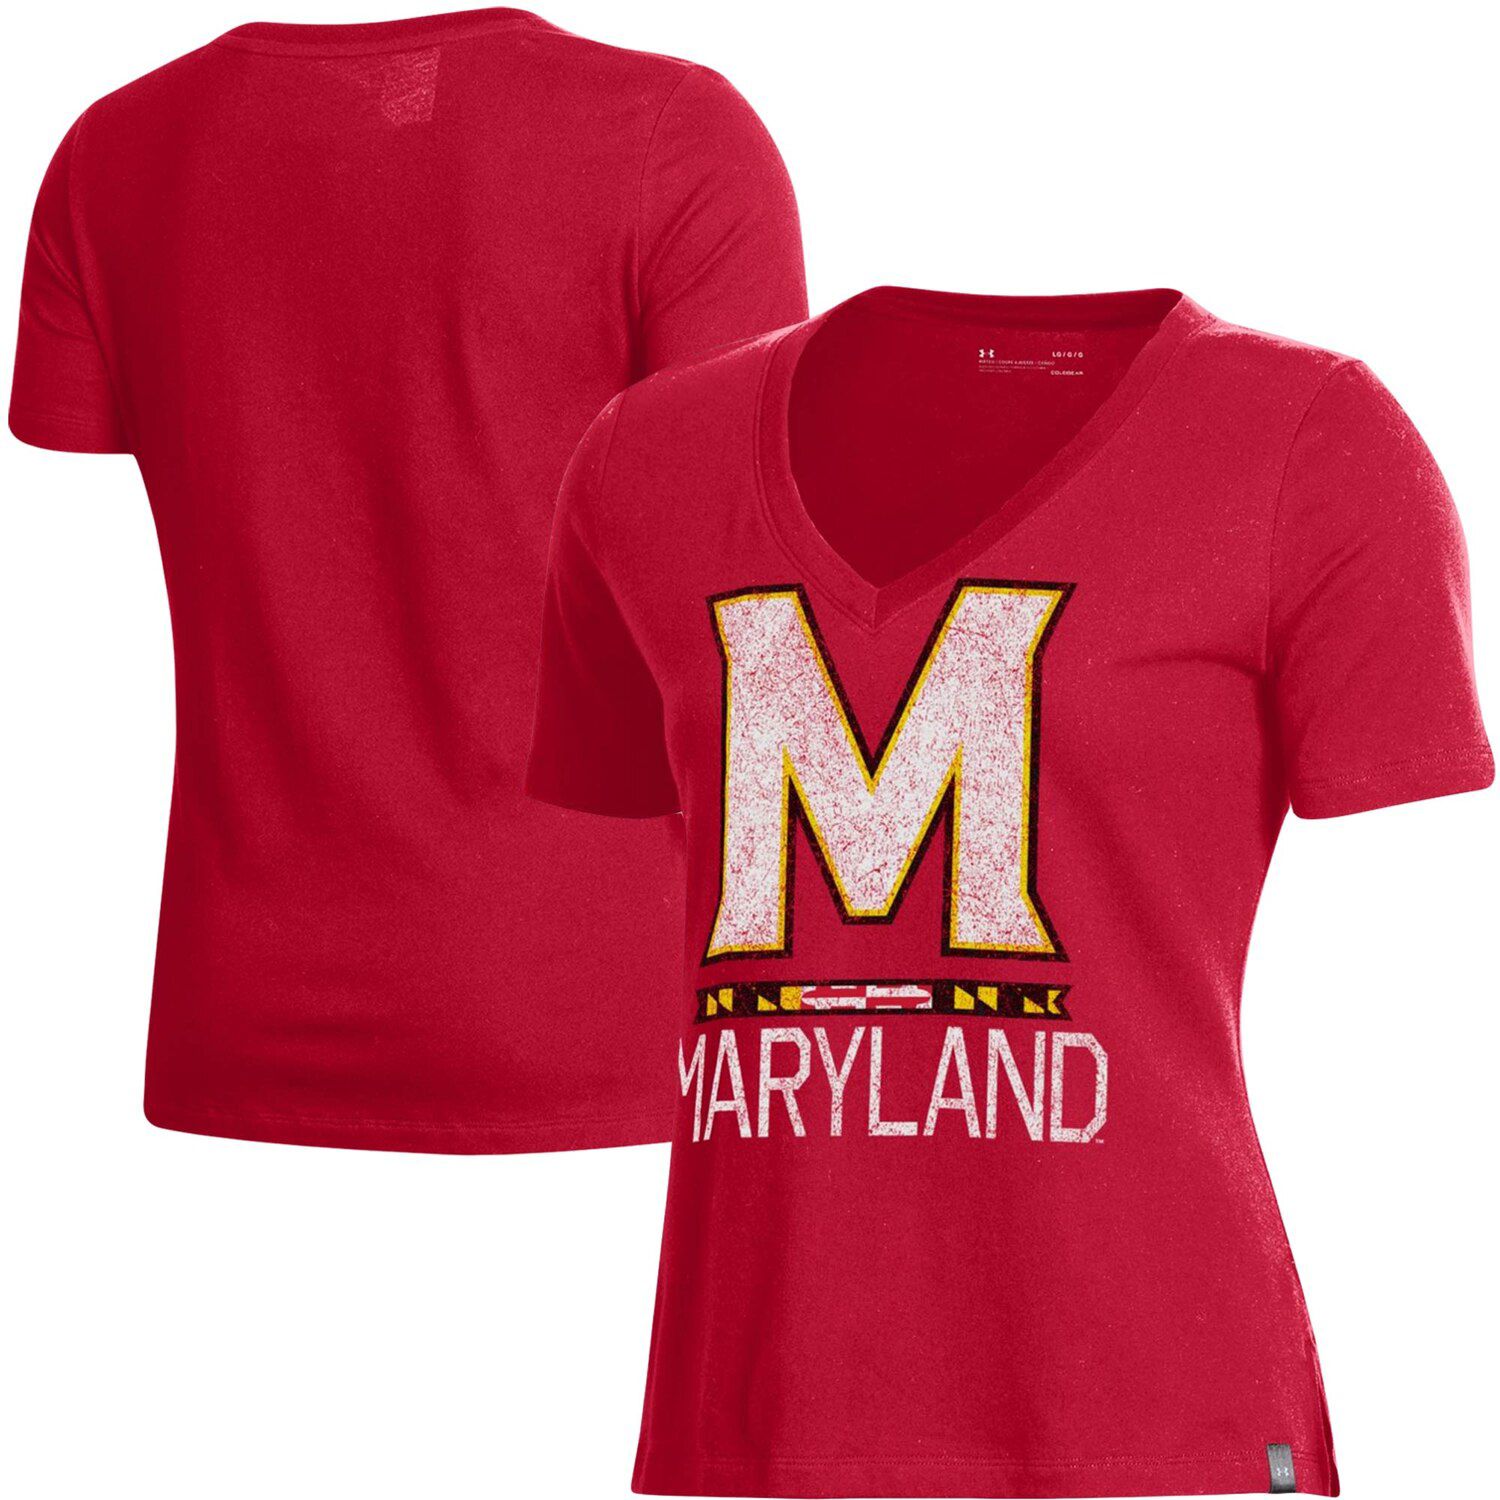 red under armour shirt womens